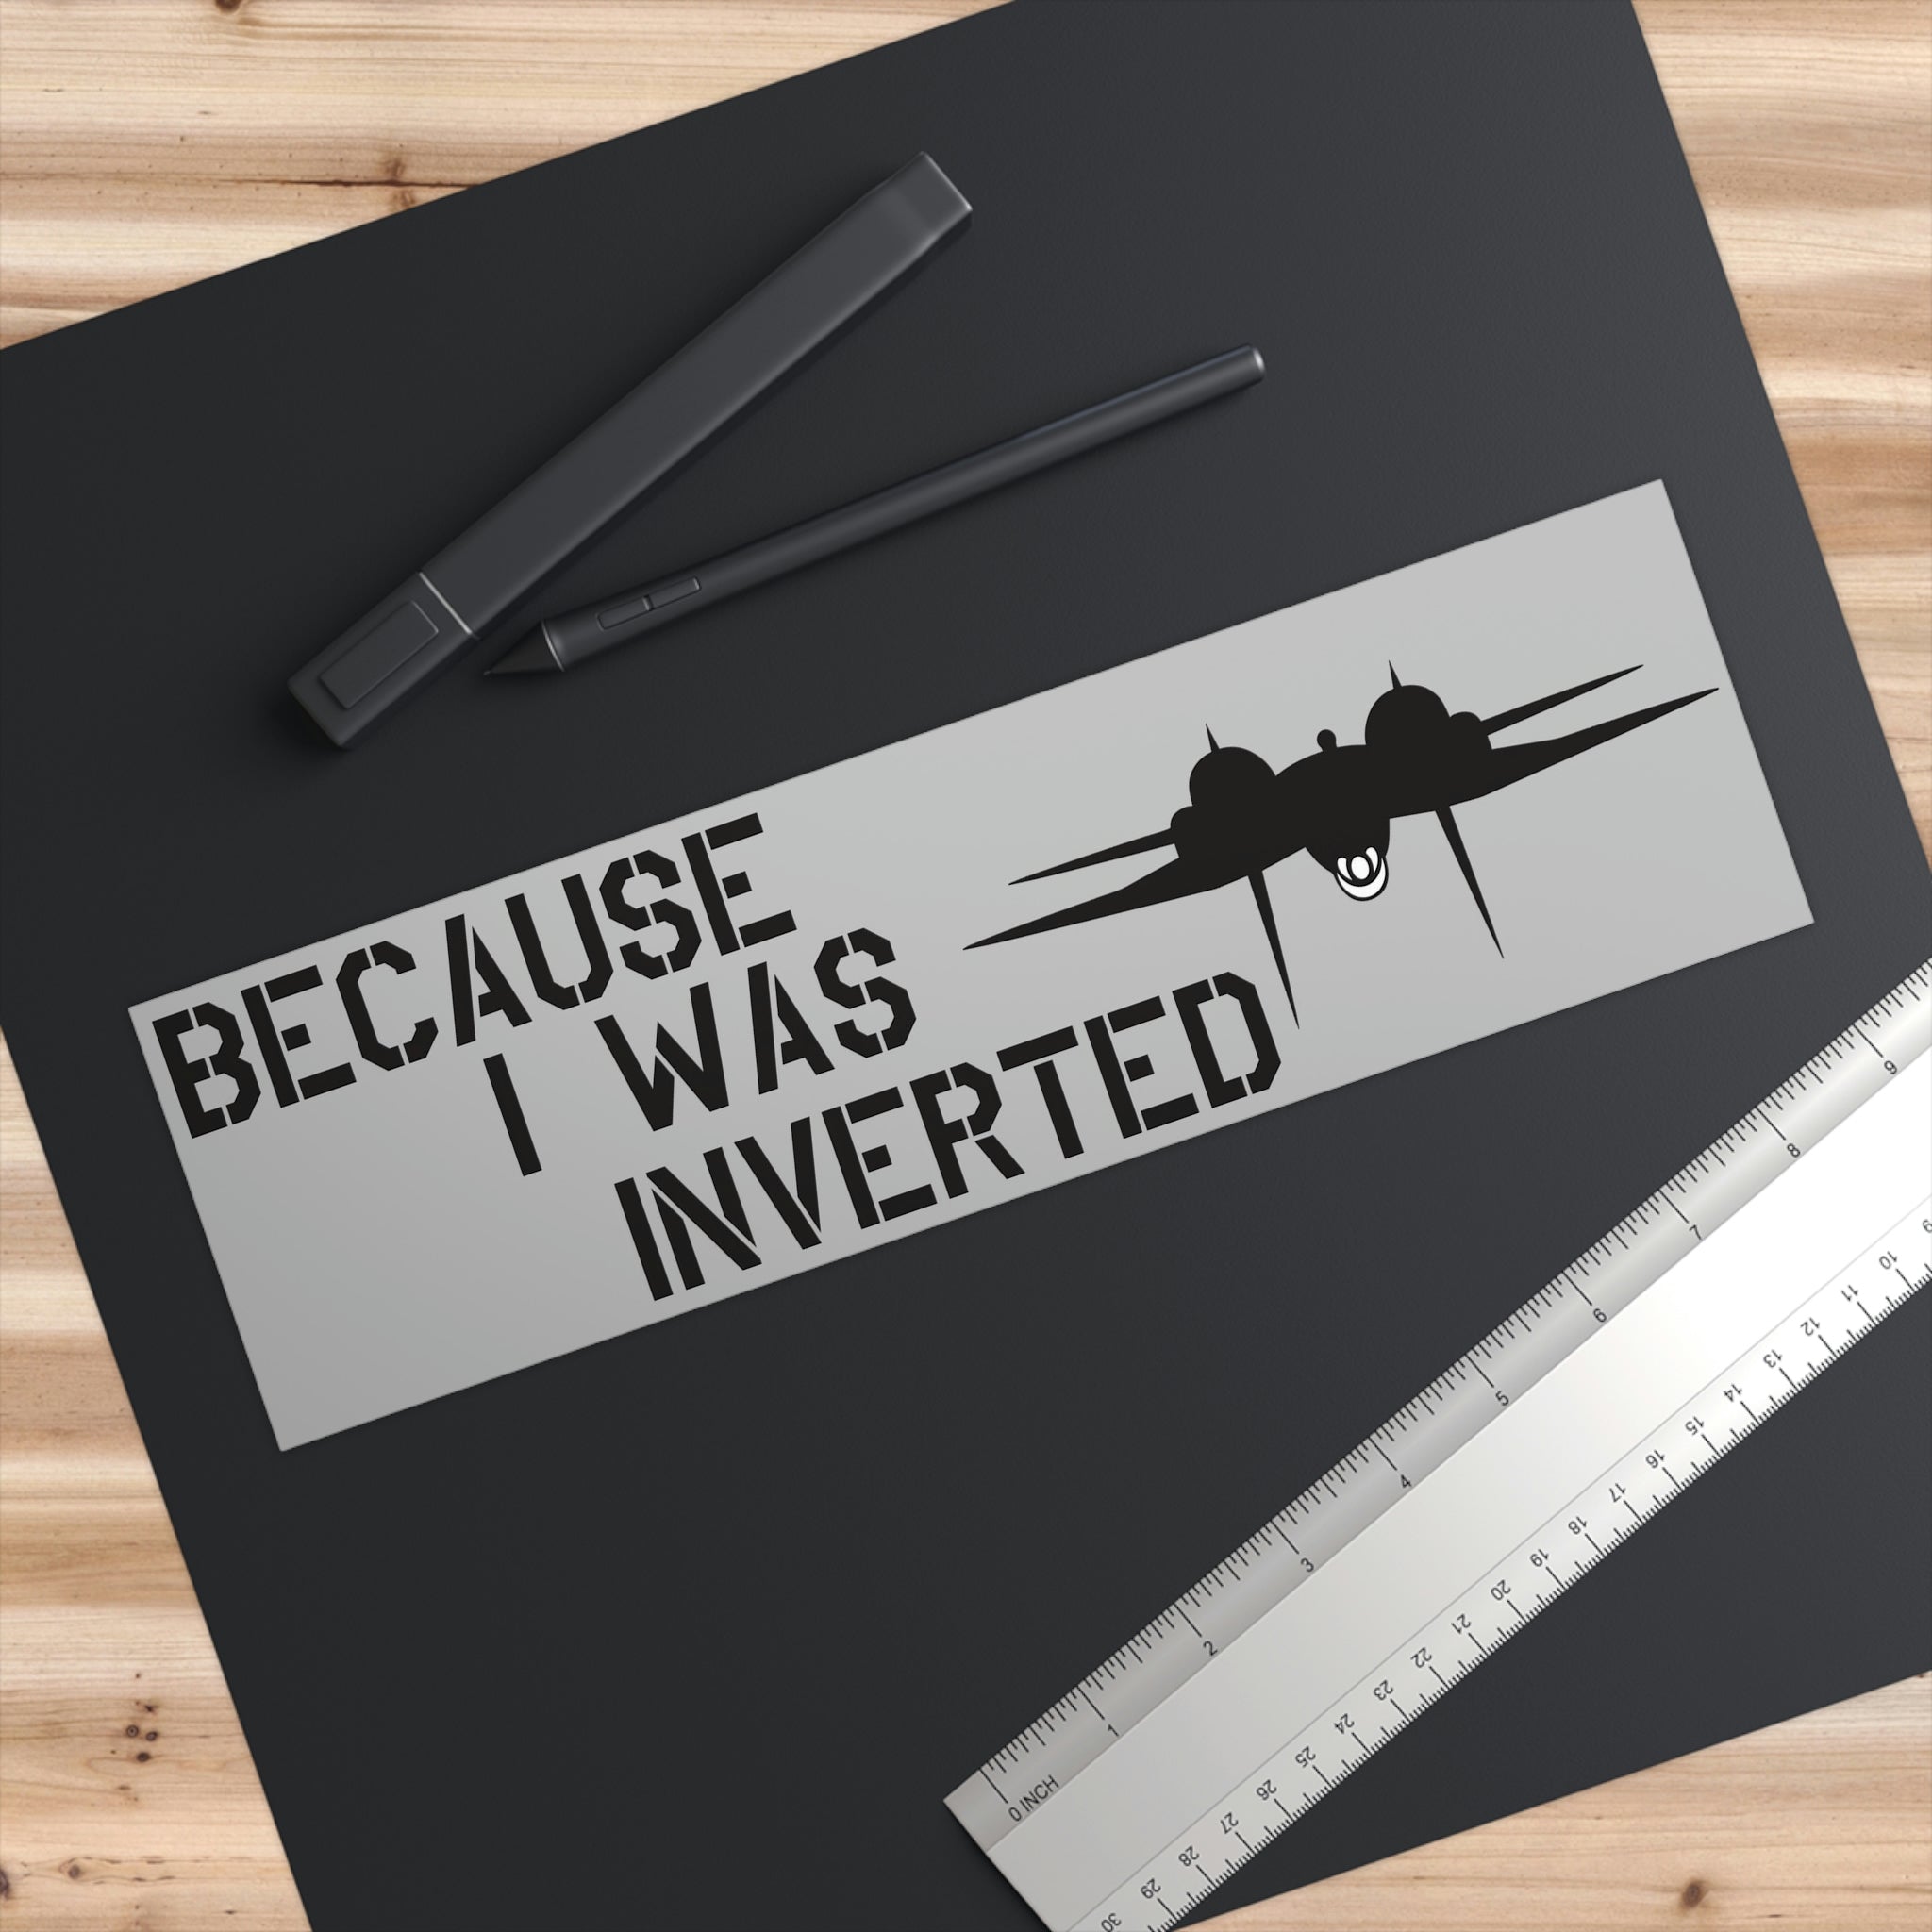 "Becuase I was inverted" Bumper Stickers - I Love a Hangar